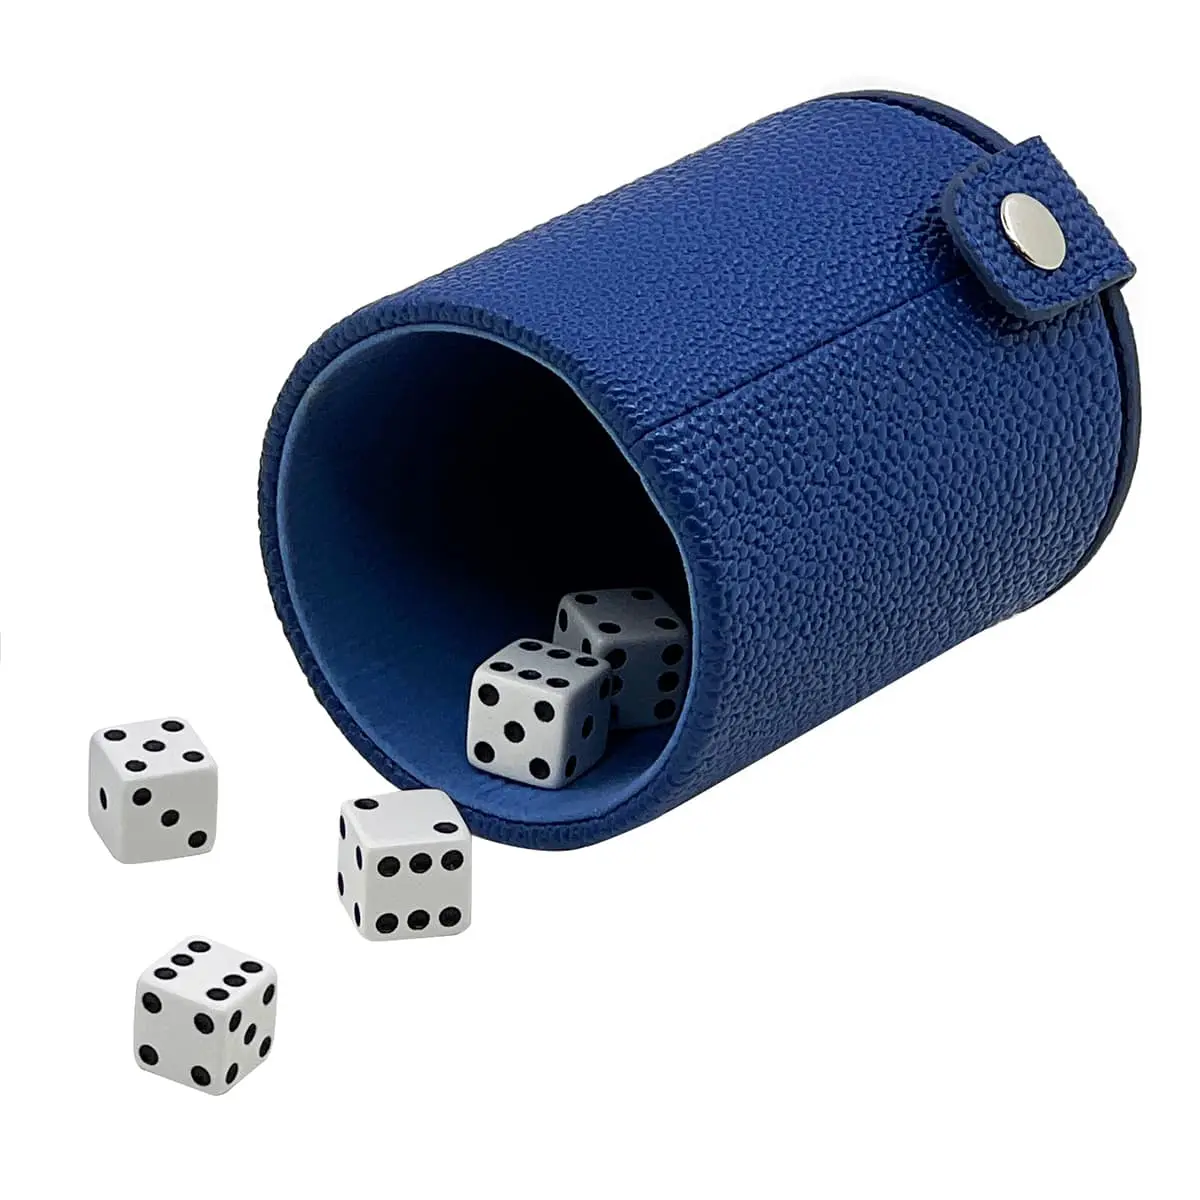 Deluxe Leatherette Dice Cup with Storage Compartment